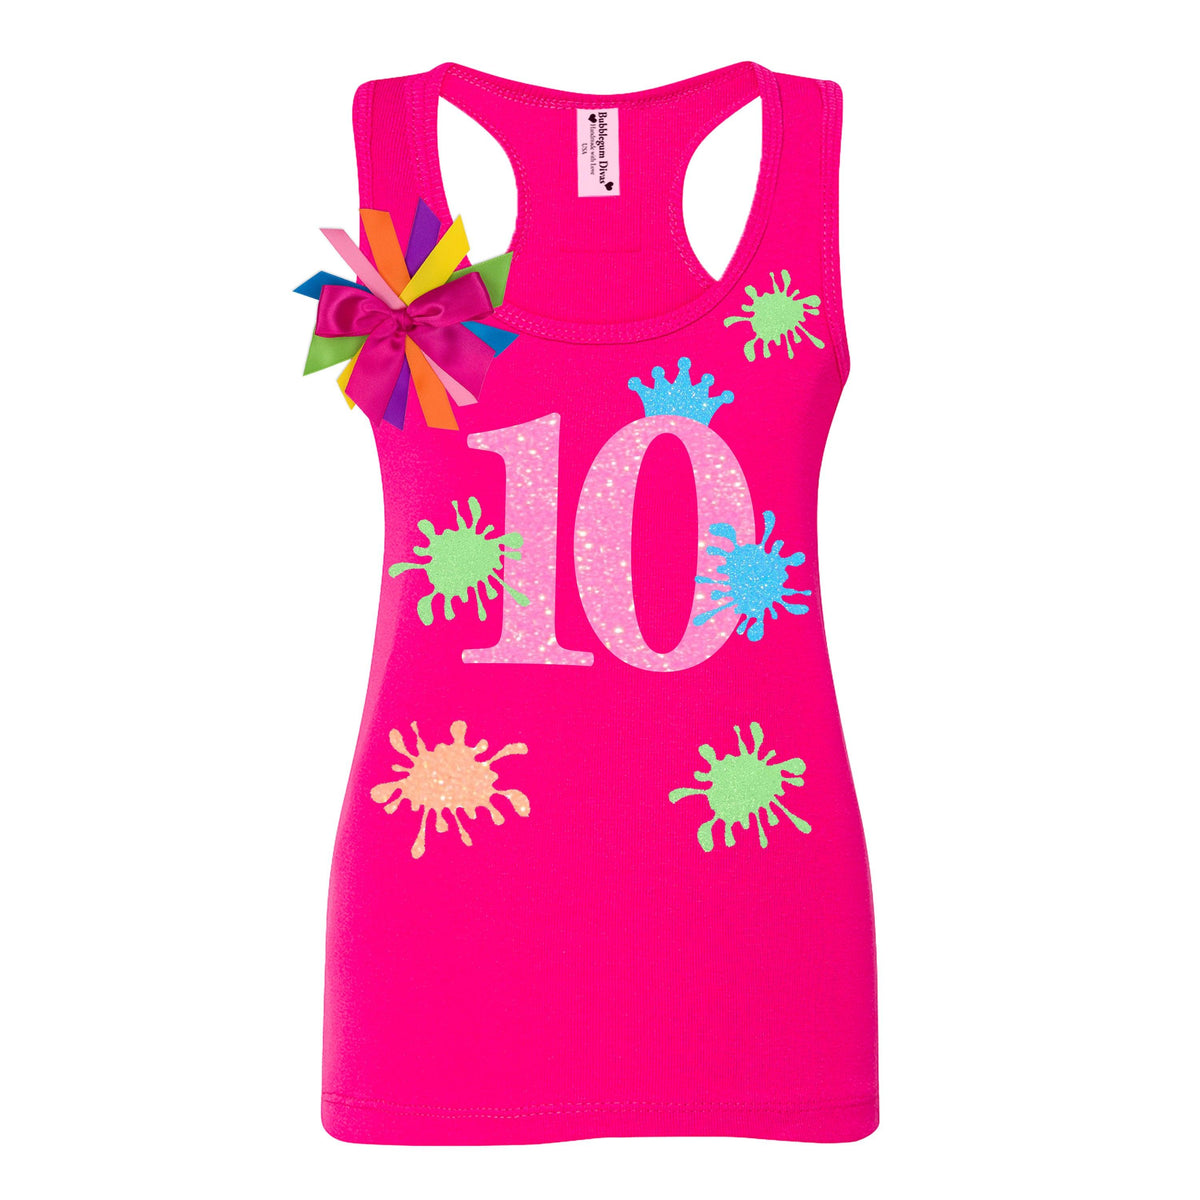 Personalized Glitter Slime 10th Birthday Tank Top